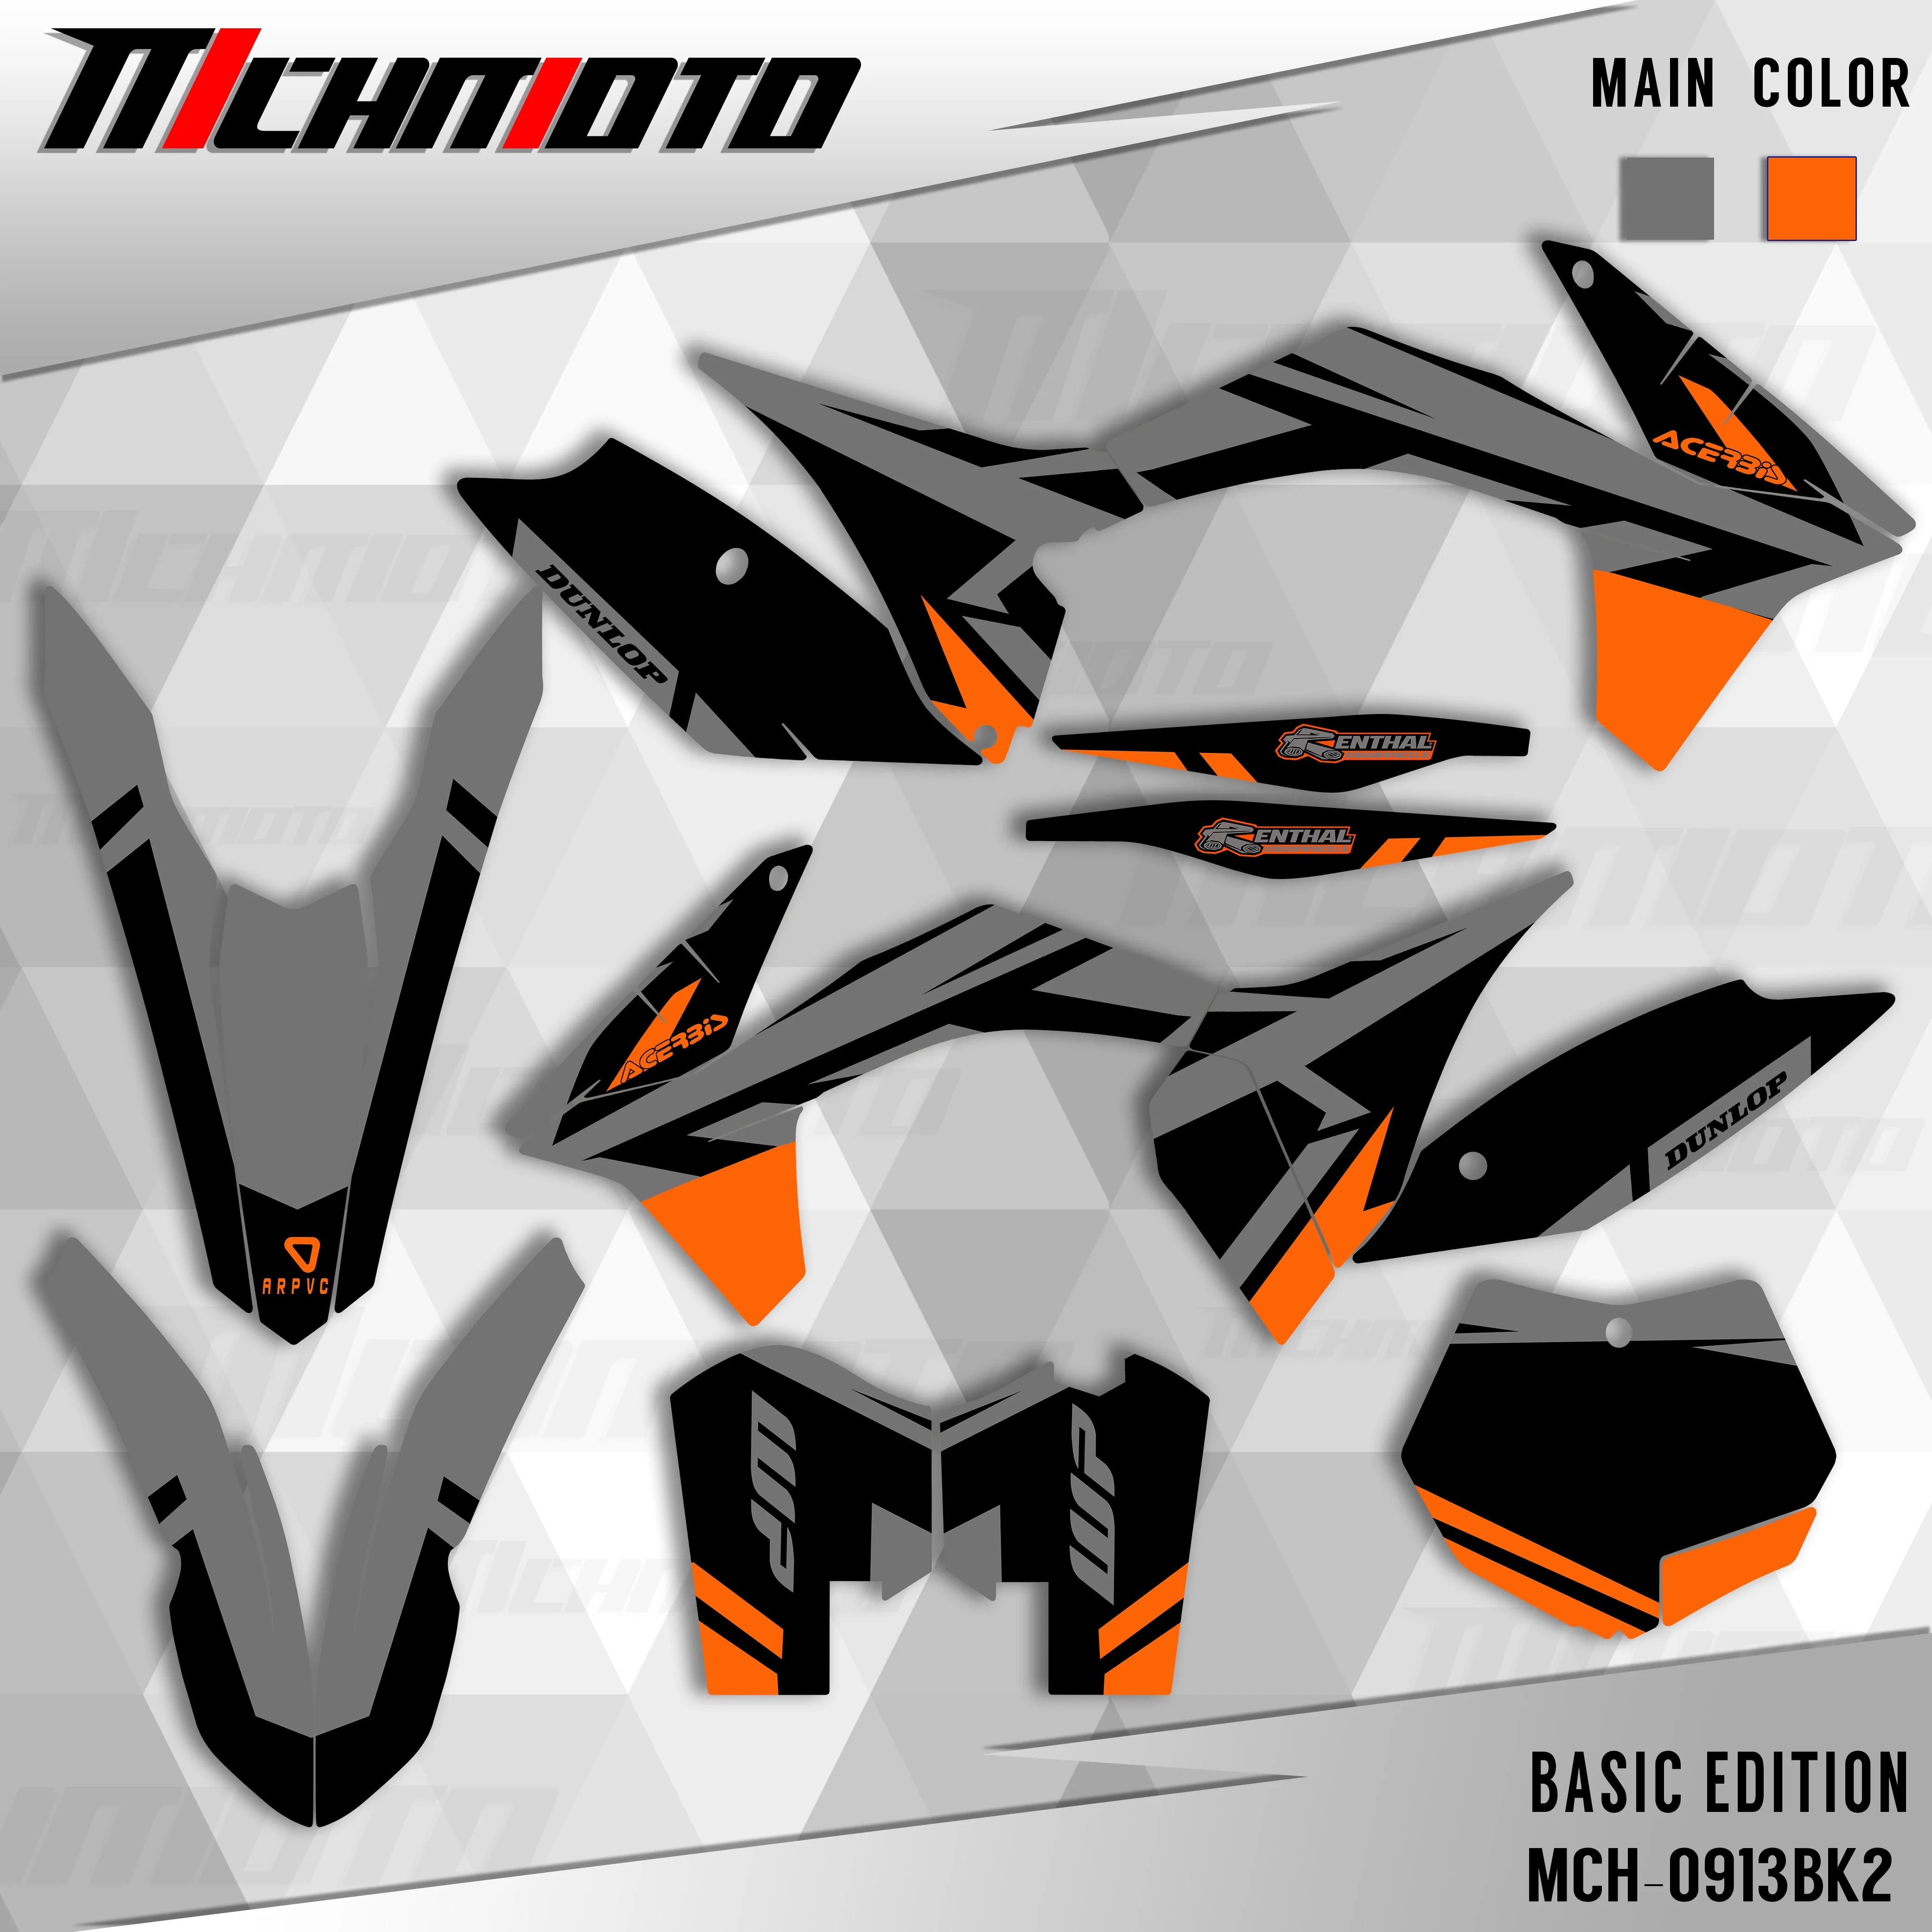 

MCHMFG For KTM SX SXF XC XCF 125 250 300 350 450 2011 2012 Full Graphics Decals Stickers Custom Number Name Stickers